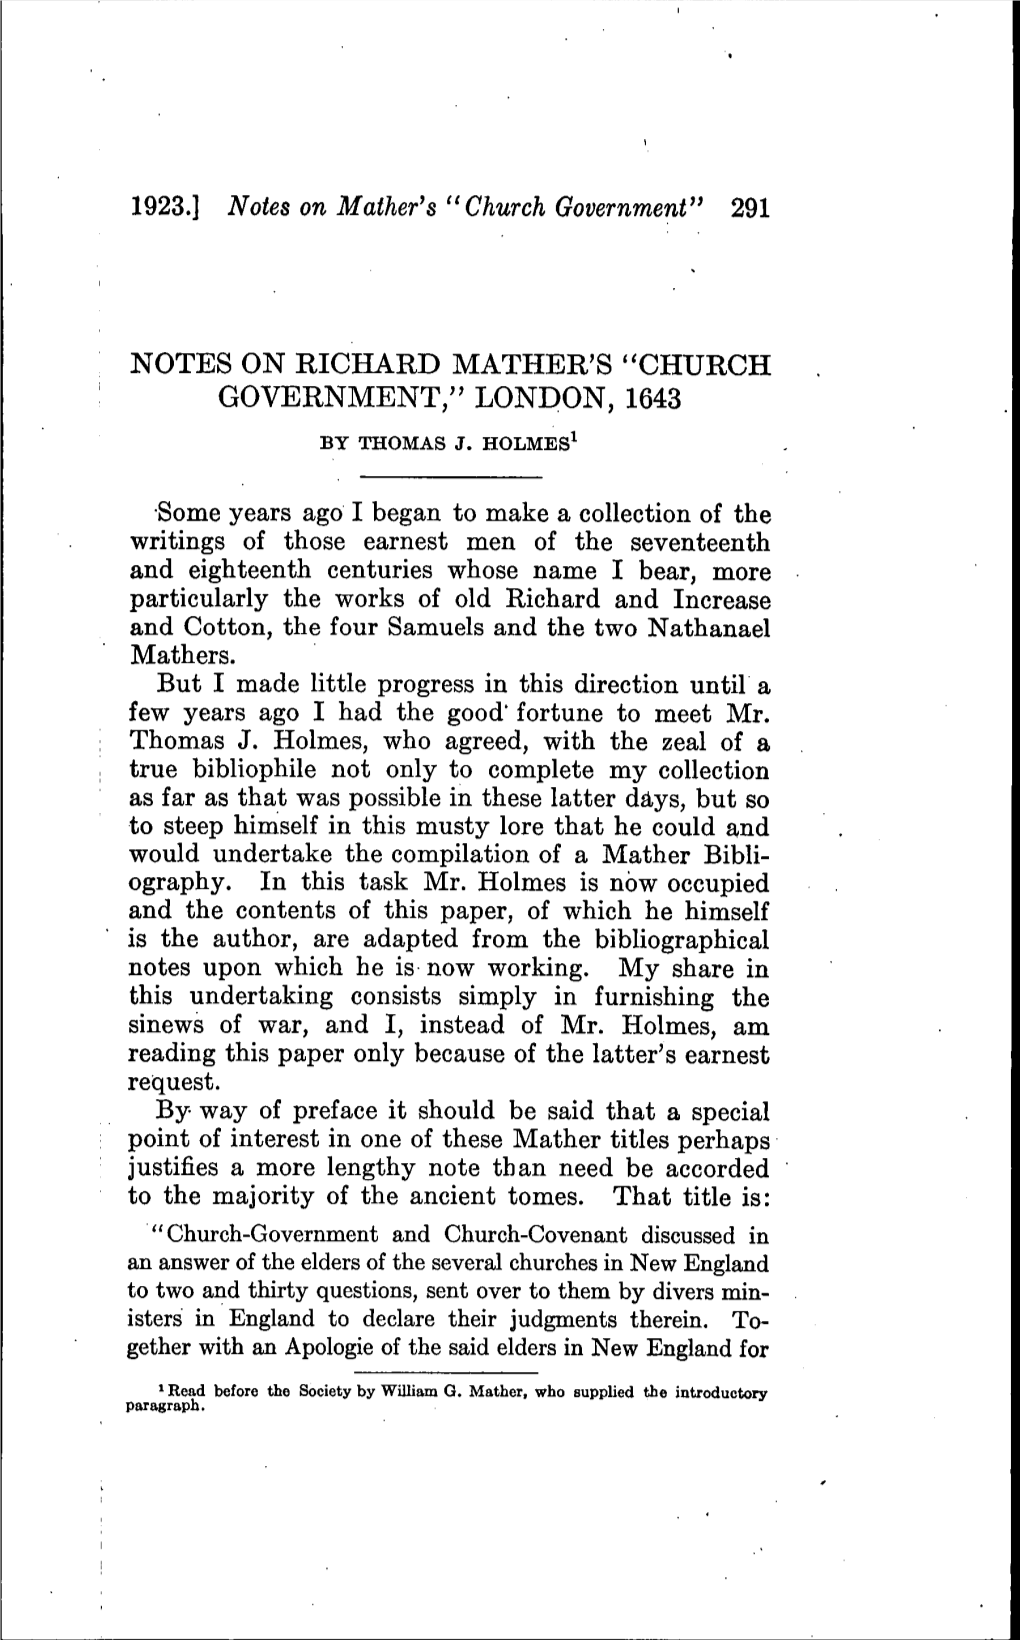 Notes on Richard Mather's "Church Government," London, 1643 by Thomas J